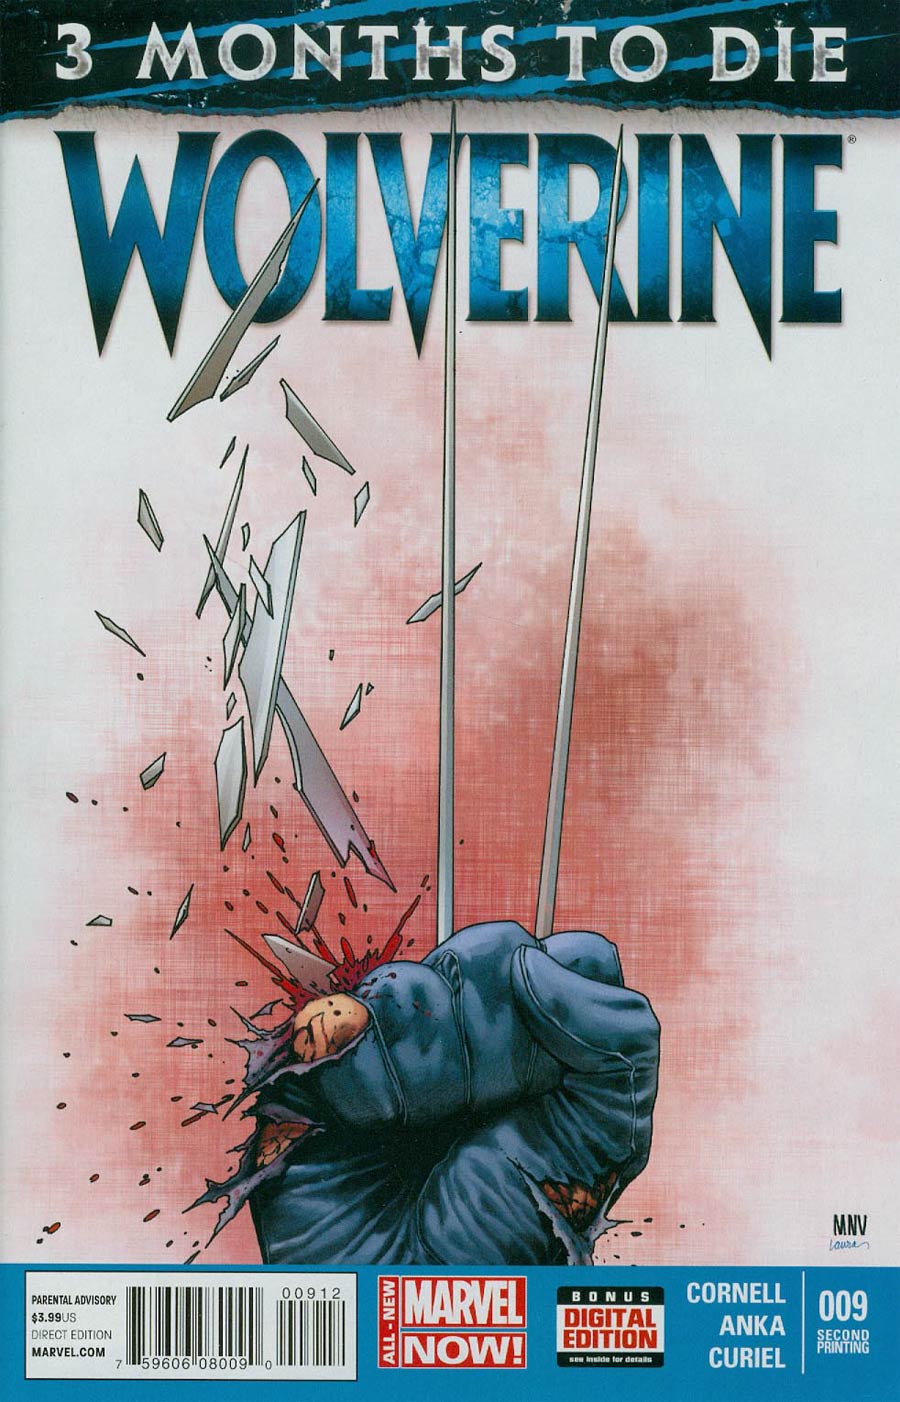 Wolverine Vol 6 #9 Cover D 2nd Ptg Steve McNiven Cover (3 Months To Die Part 2)